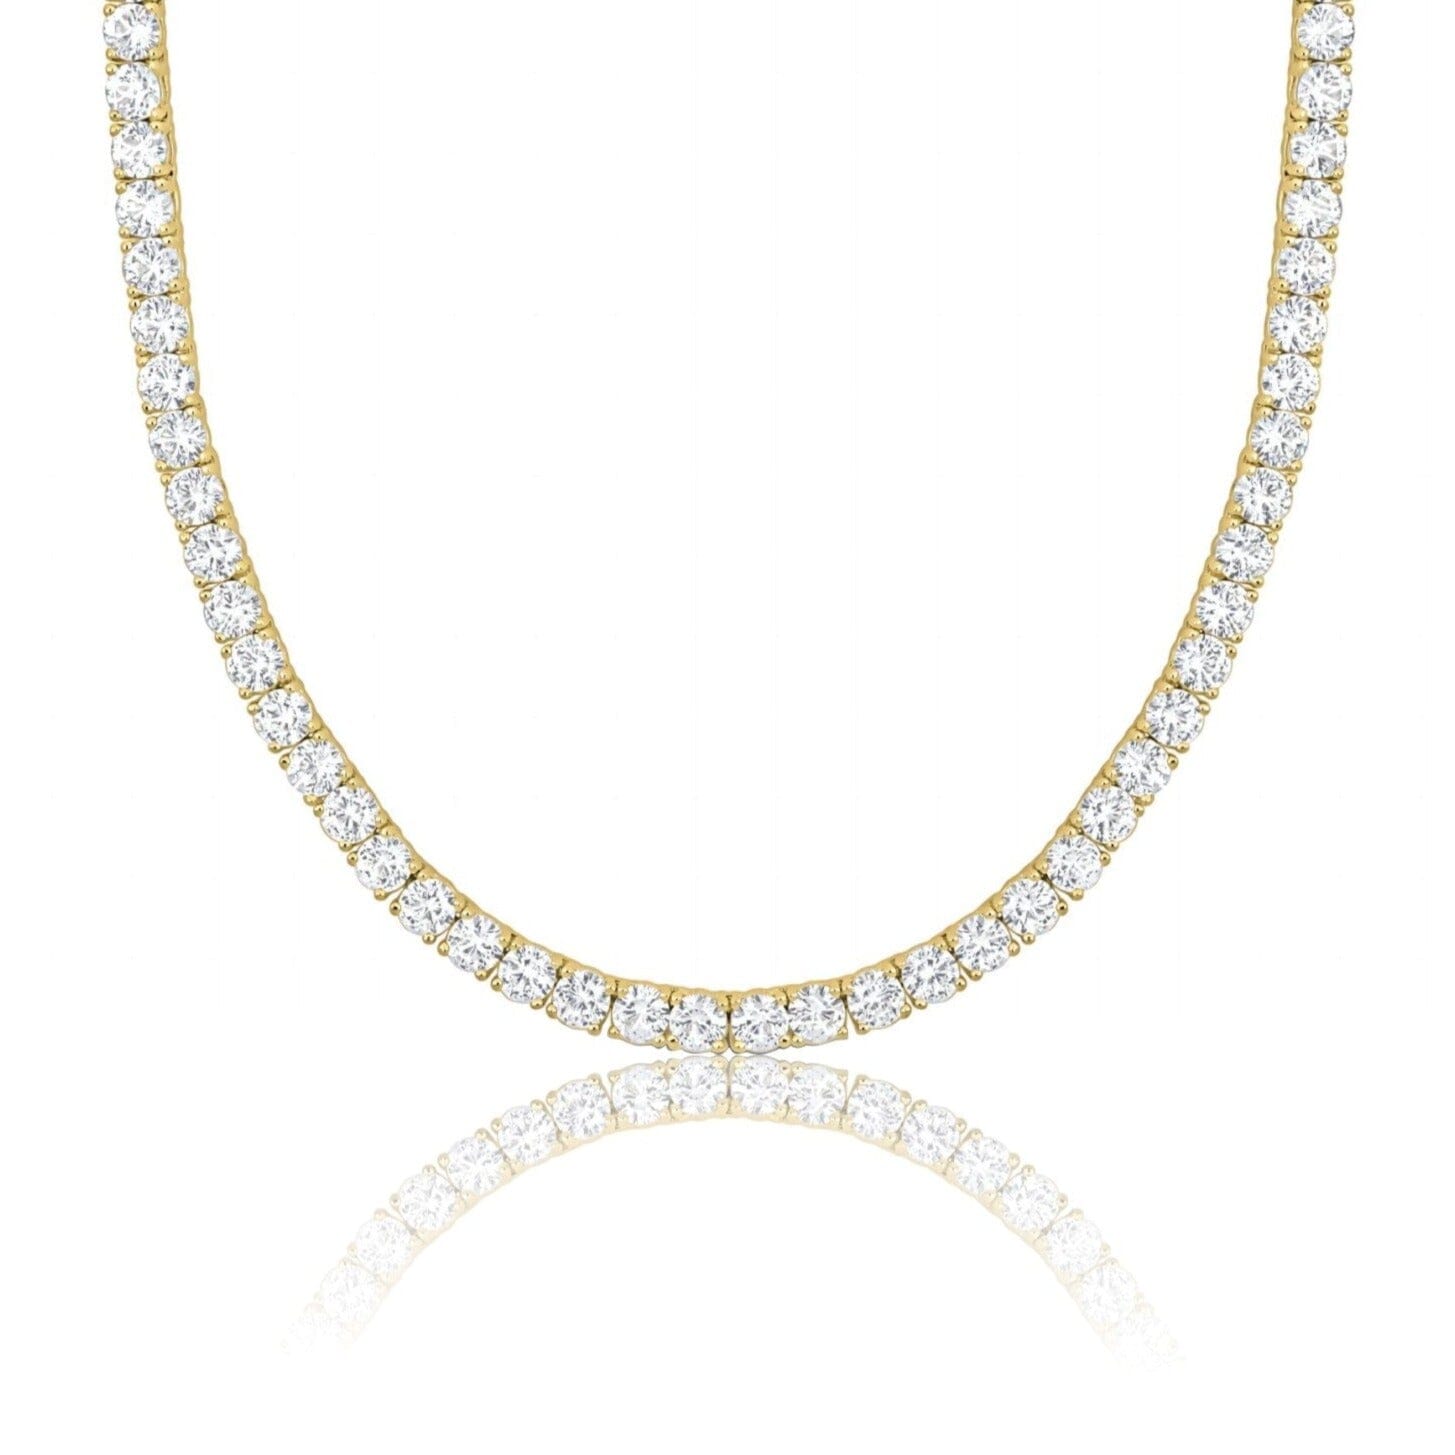 VVS1 Moissanite Diamond 925 Sterling Silver Tennis Chain in 18K Gold Necklaces 